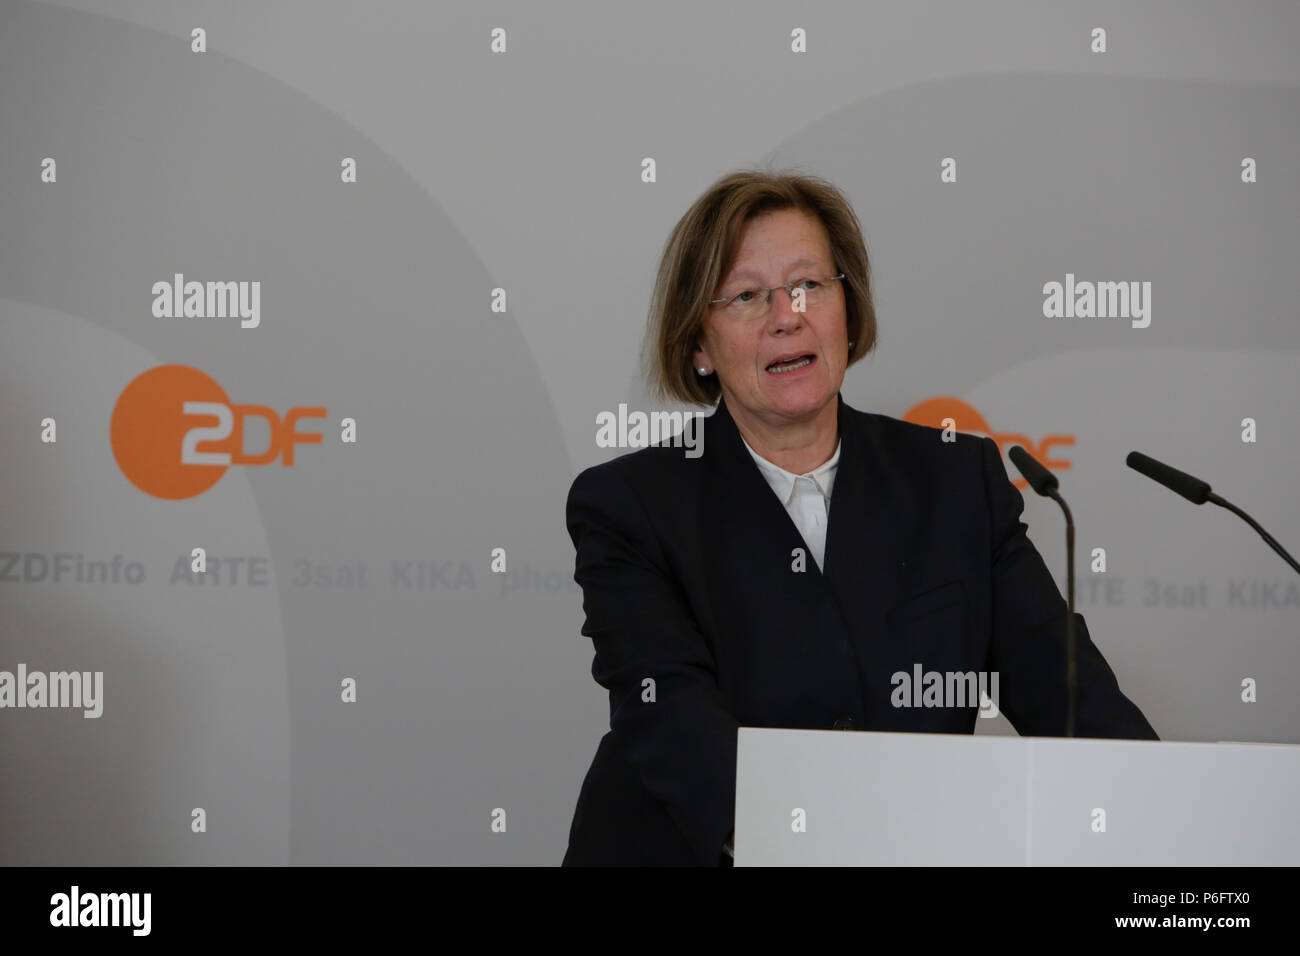 Mainz, Germany. 29th June, 2018. Marlehn Thieme, the chairwoman of the ZDF Television Board (ZDF-Fernsehrat), addresses the press conference. The Television Board of the German public-service television broadcaster ZDF (Zweites Deutsches Fernsehen) met for their 9. meeting of its XV. term of office in Mainz. The chairwoman of the Television Board Marlehn Thieme was re-elected to her position in the scheduled midterm election of the 3 seats of the presidium. Credit: Michael Debets/Pacific Press/Alamy Live News Stock Photo